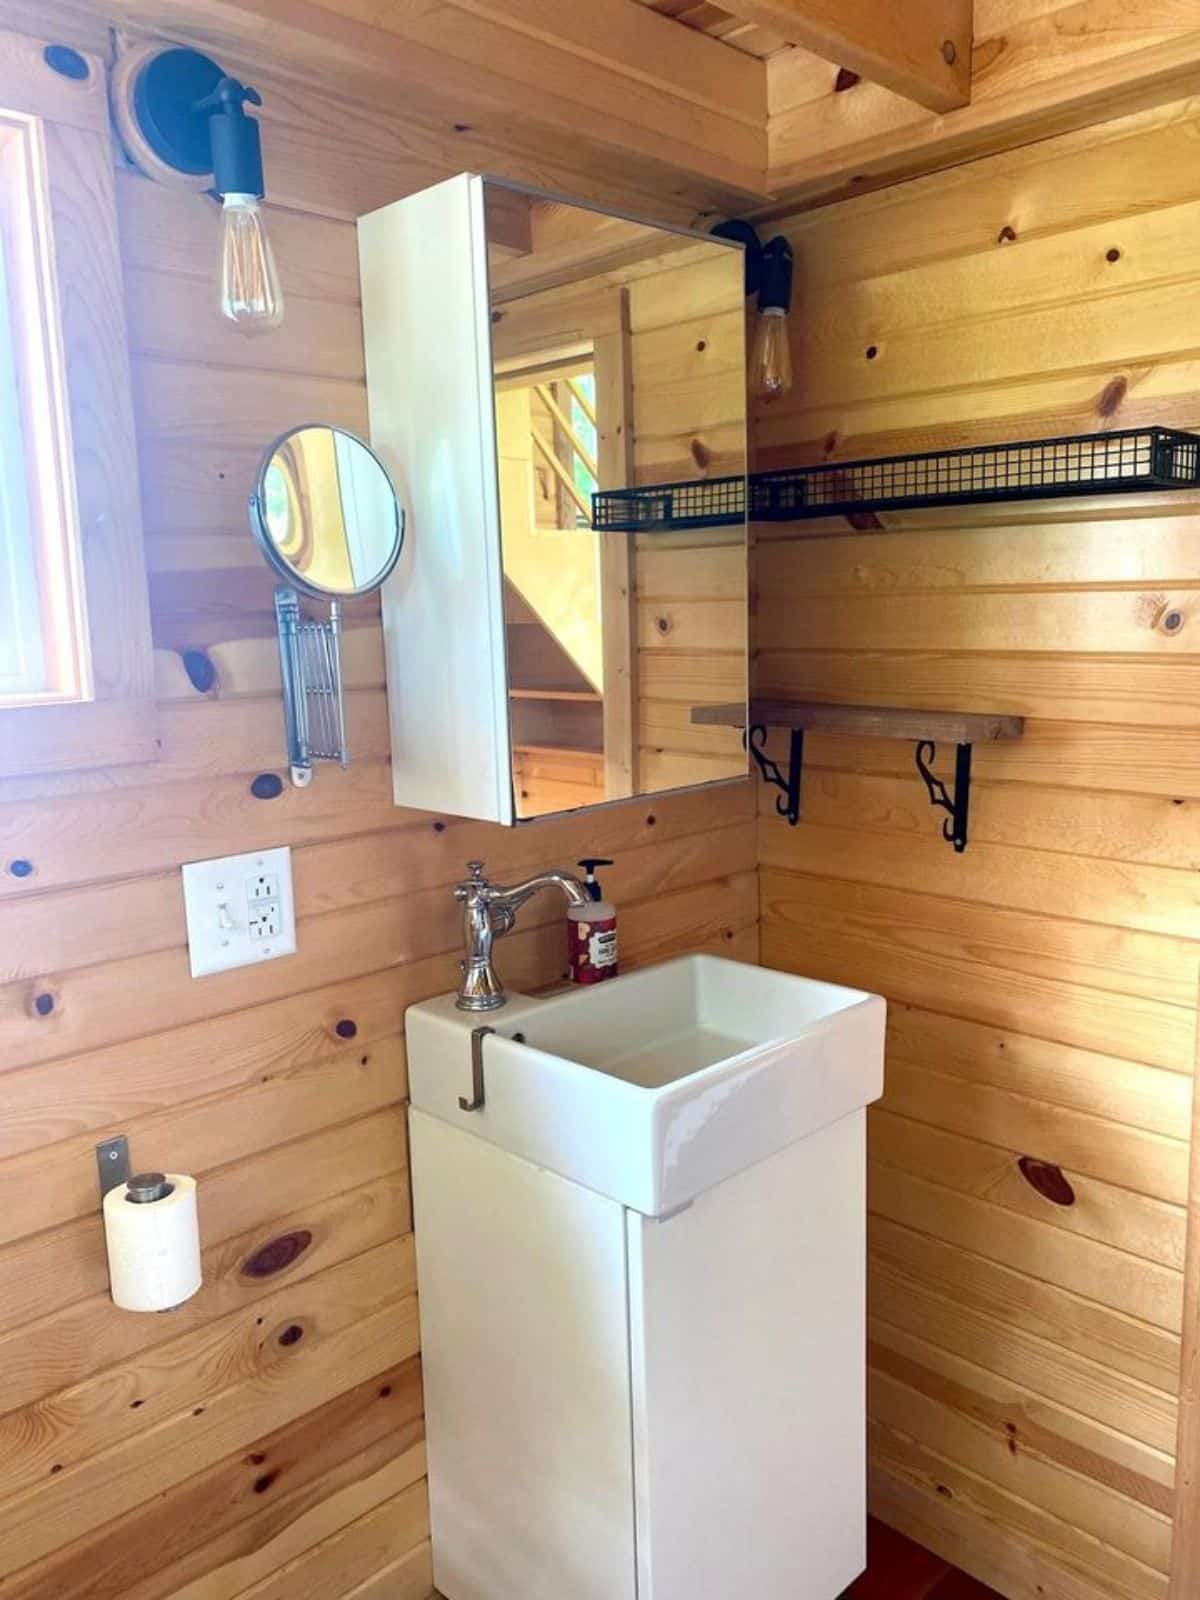 Sink with vanity and mirror in bathroom of 32’ Custom Tiny House